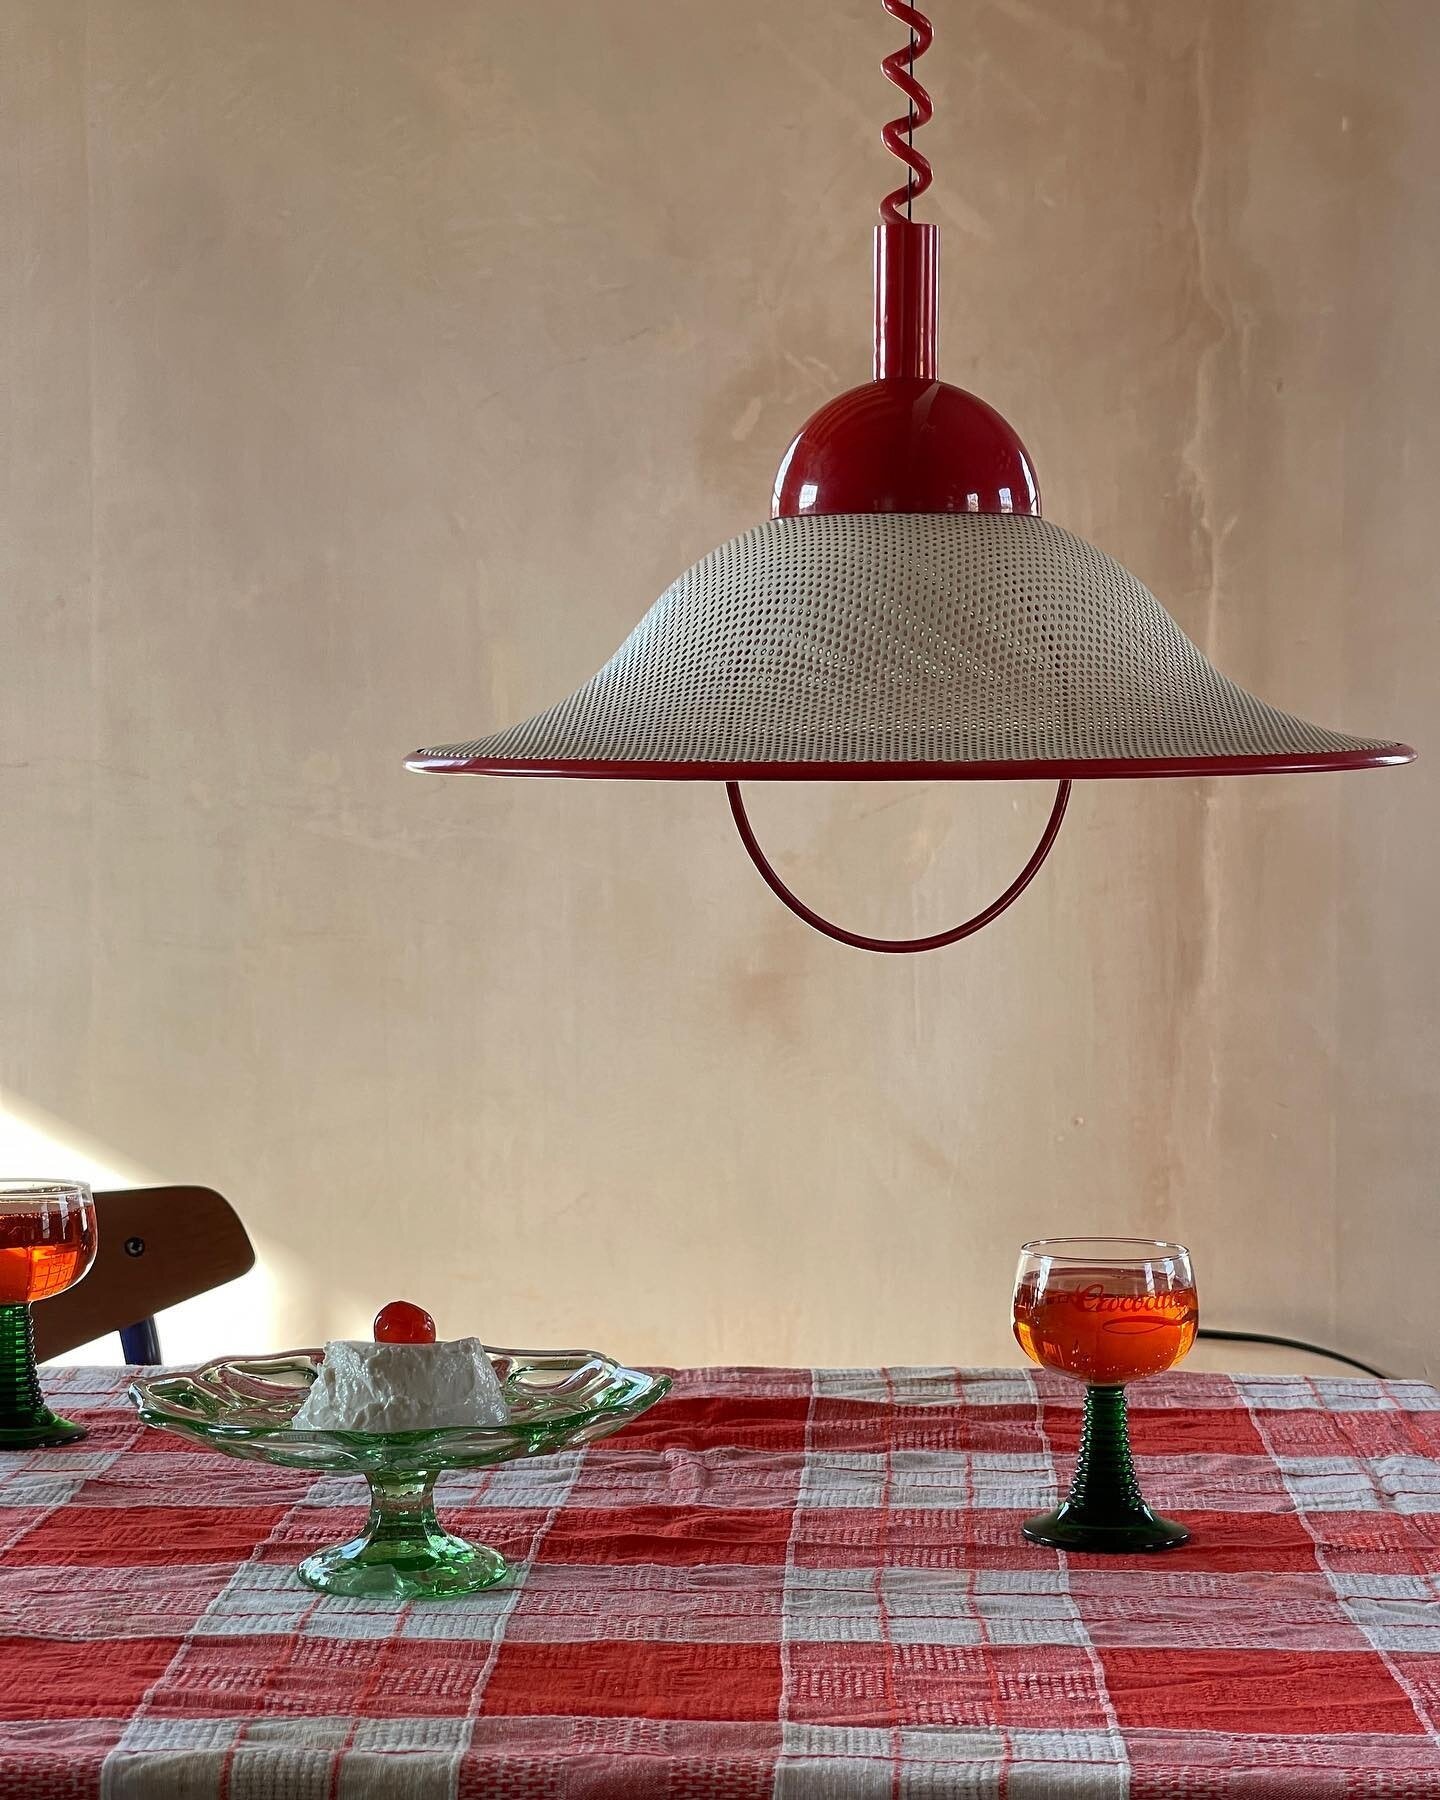 1960s Italian Ceiling Light | &pound;250 SALE PRICE 
Painted perforated metal pendant light with a plastic red cap and coiled wire. The light has a handle so you can pull it to the desired height. 
- Originally from Italy
- Circa 1960s
- Red and whit